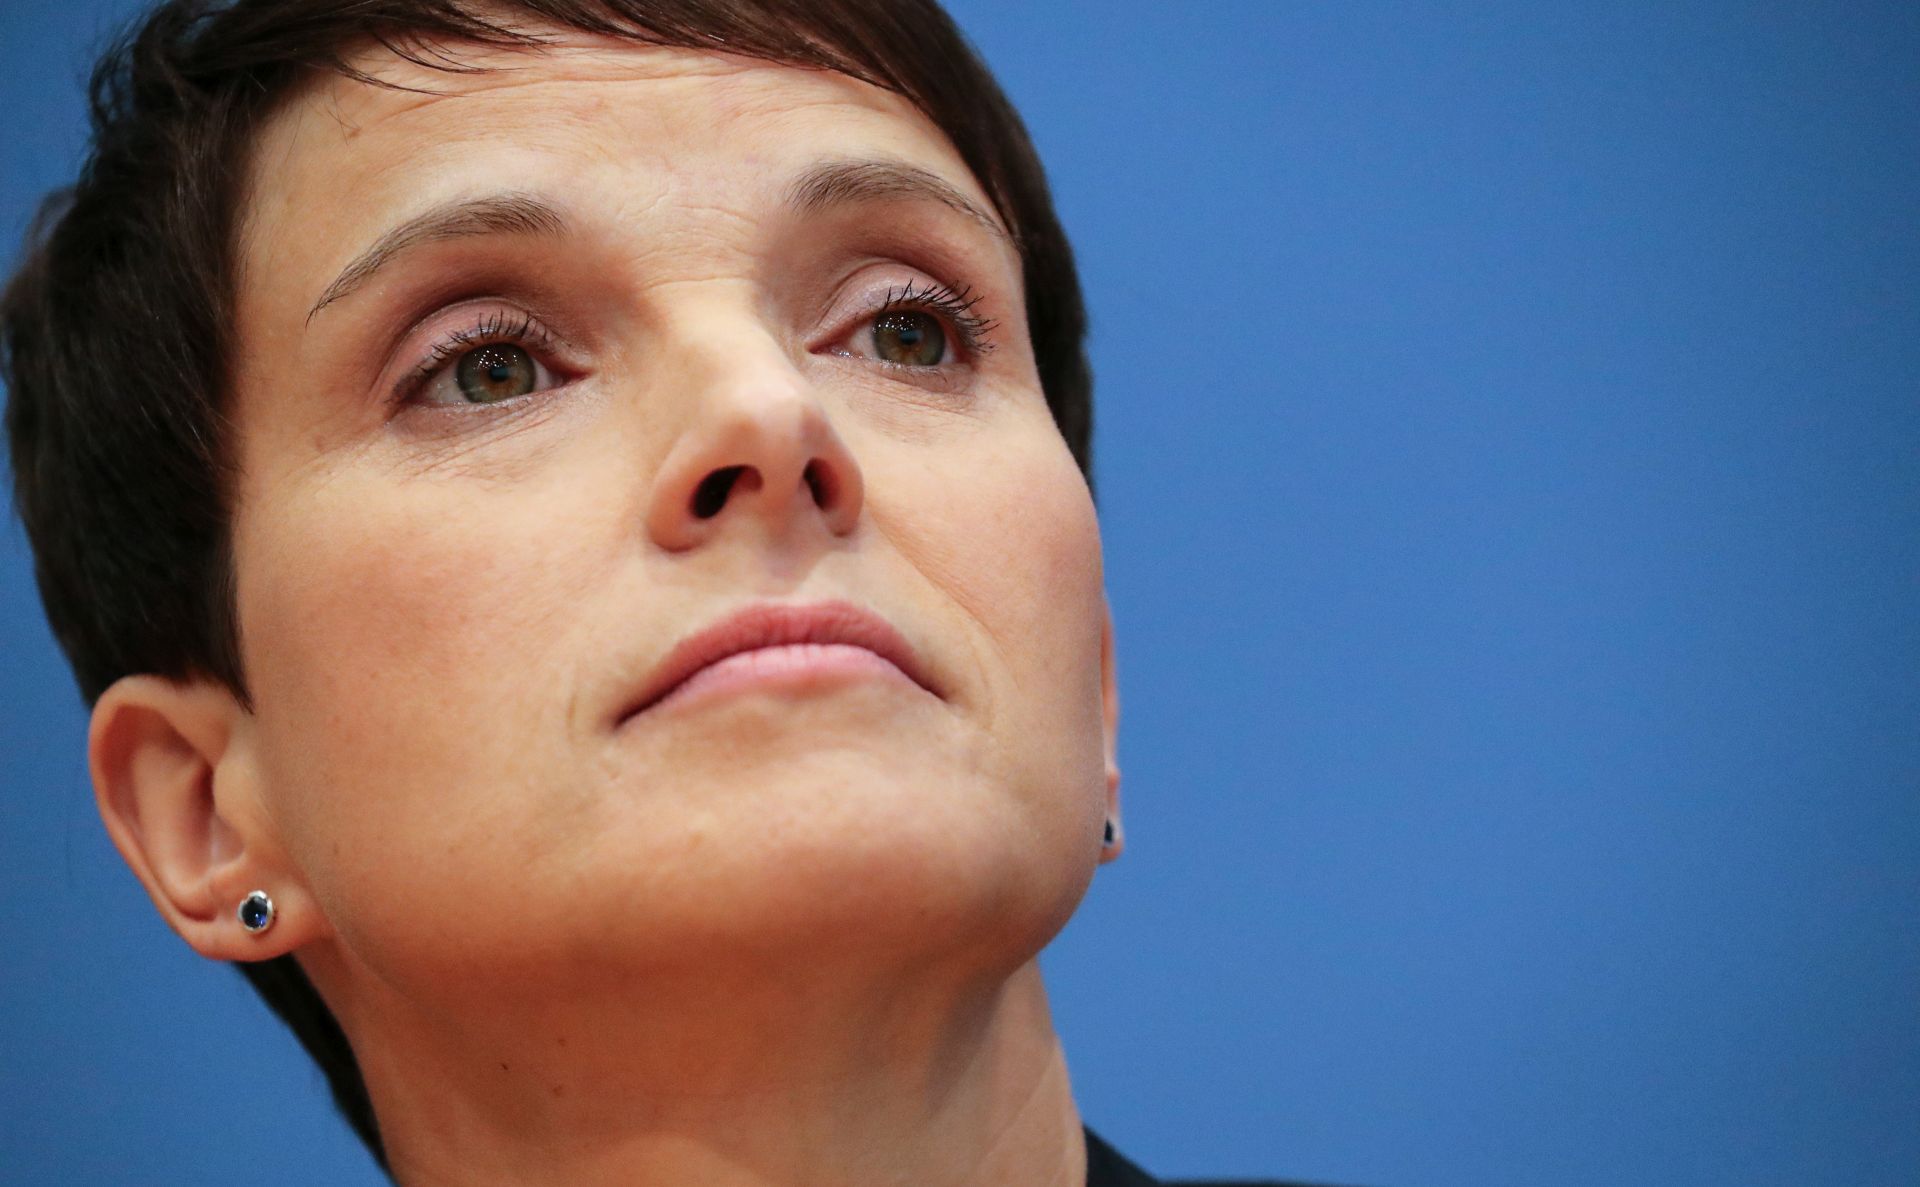 epa06225427 Frauke Petry, chairwoman of the German right-wing populist party 'Alternative for Germany' (AfD), attends a news conference in Berlin, Germany, 25 September 2017. The right-wing populist AfD party became the third strongest party in the next German federal parliament, the Bundestag, following the 24 September general elections.  EPA/CLEMENS BILAN